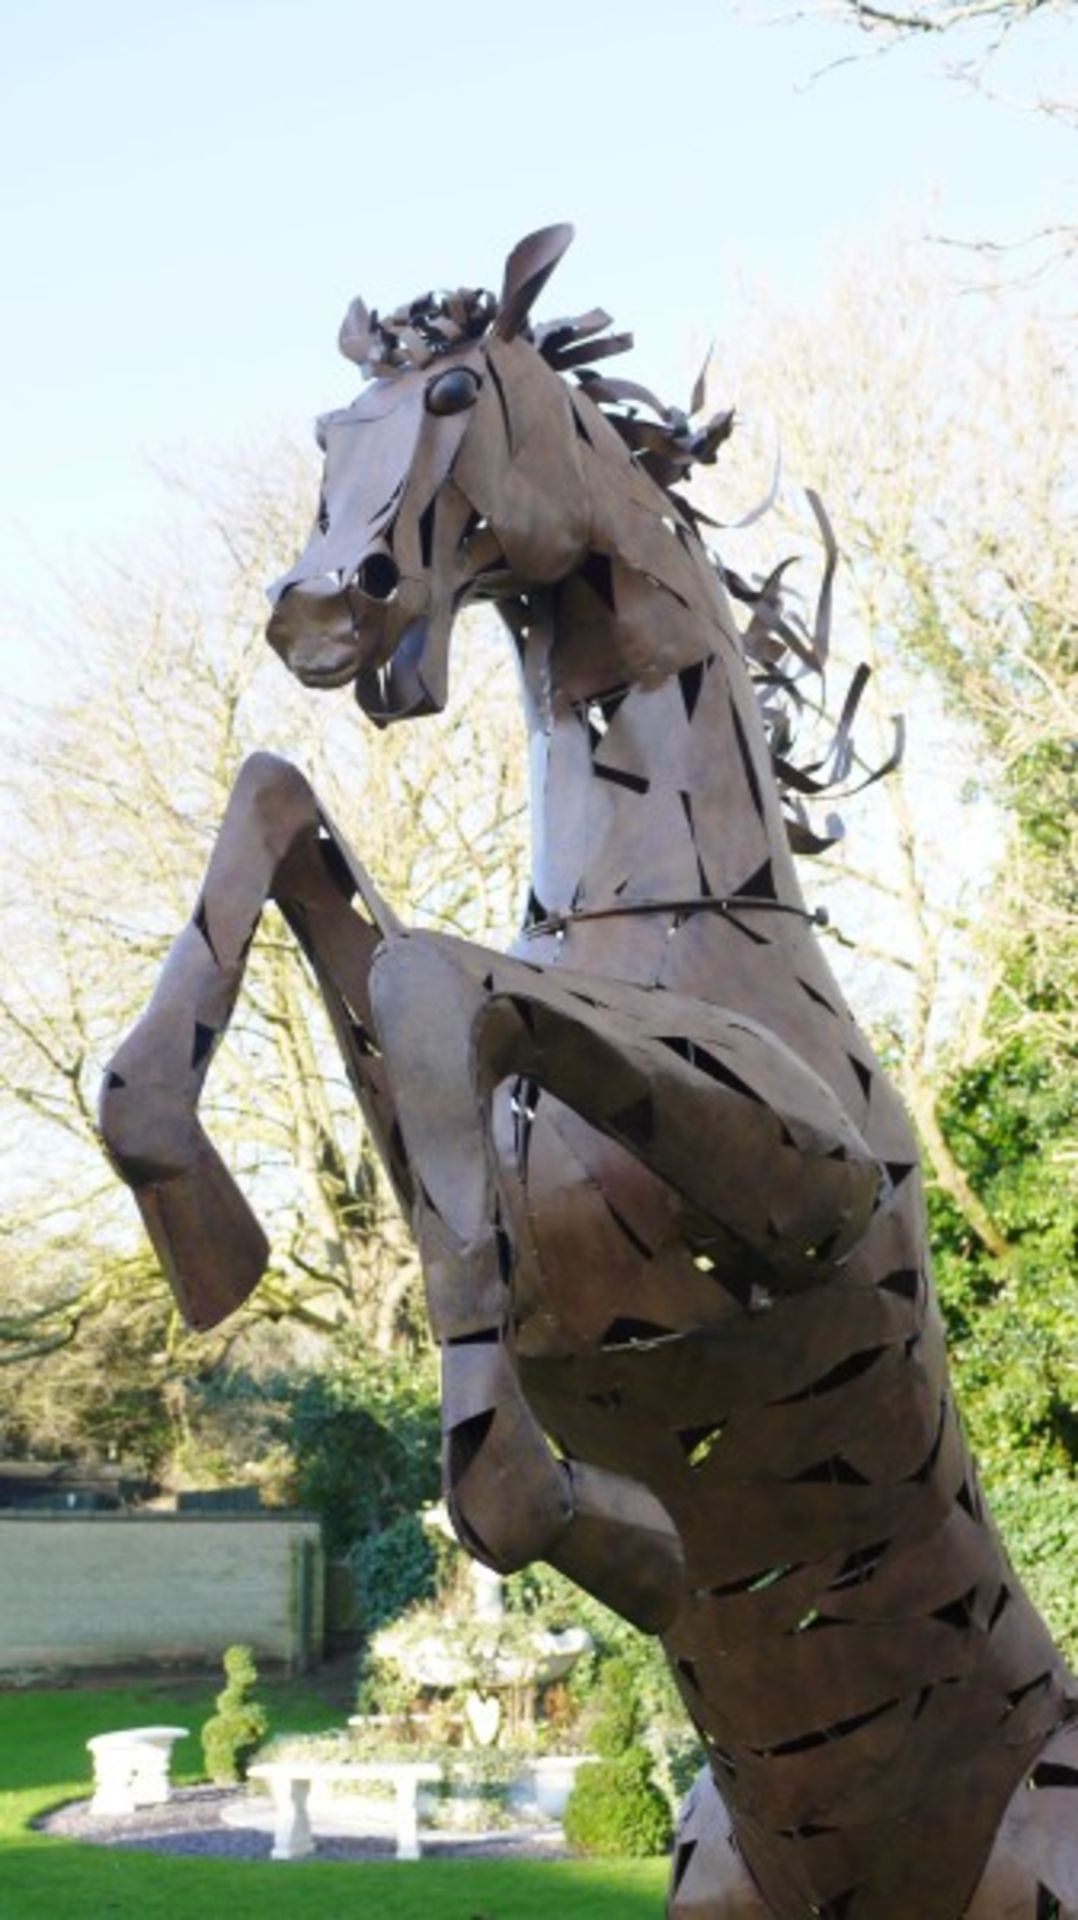 VERY RARE METAL REARING HORSE STATUE - 11 FEET HIGH ! - Image 3 of 7